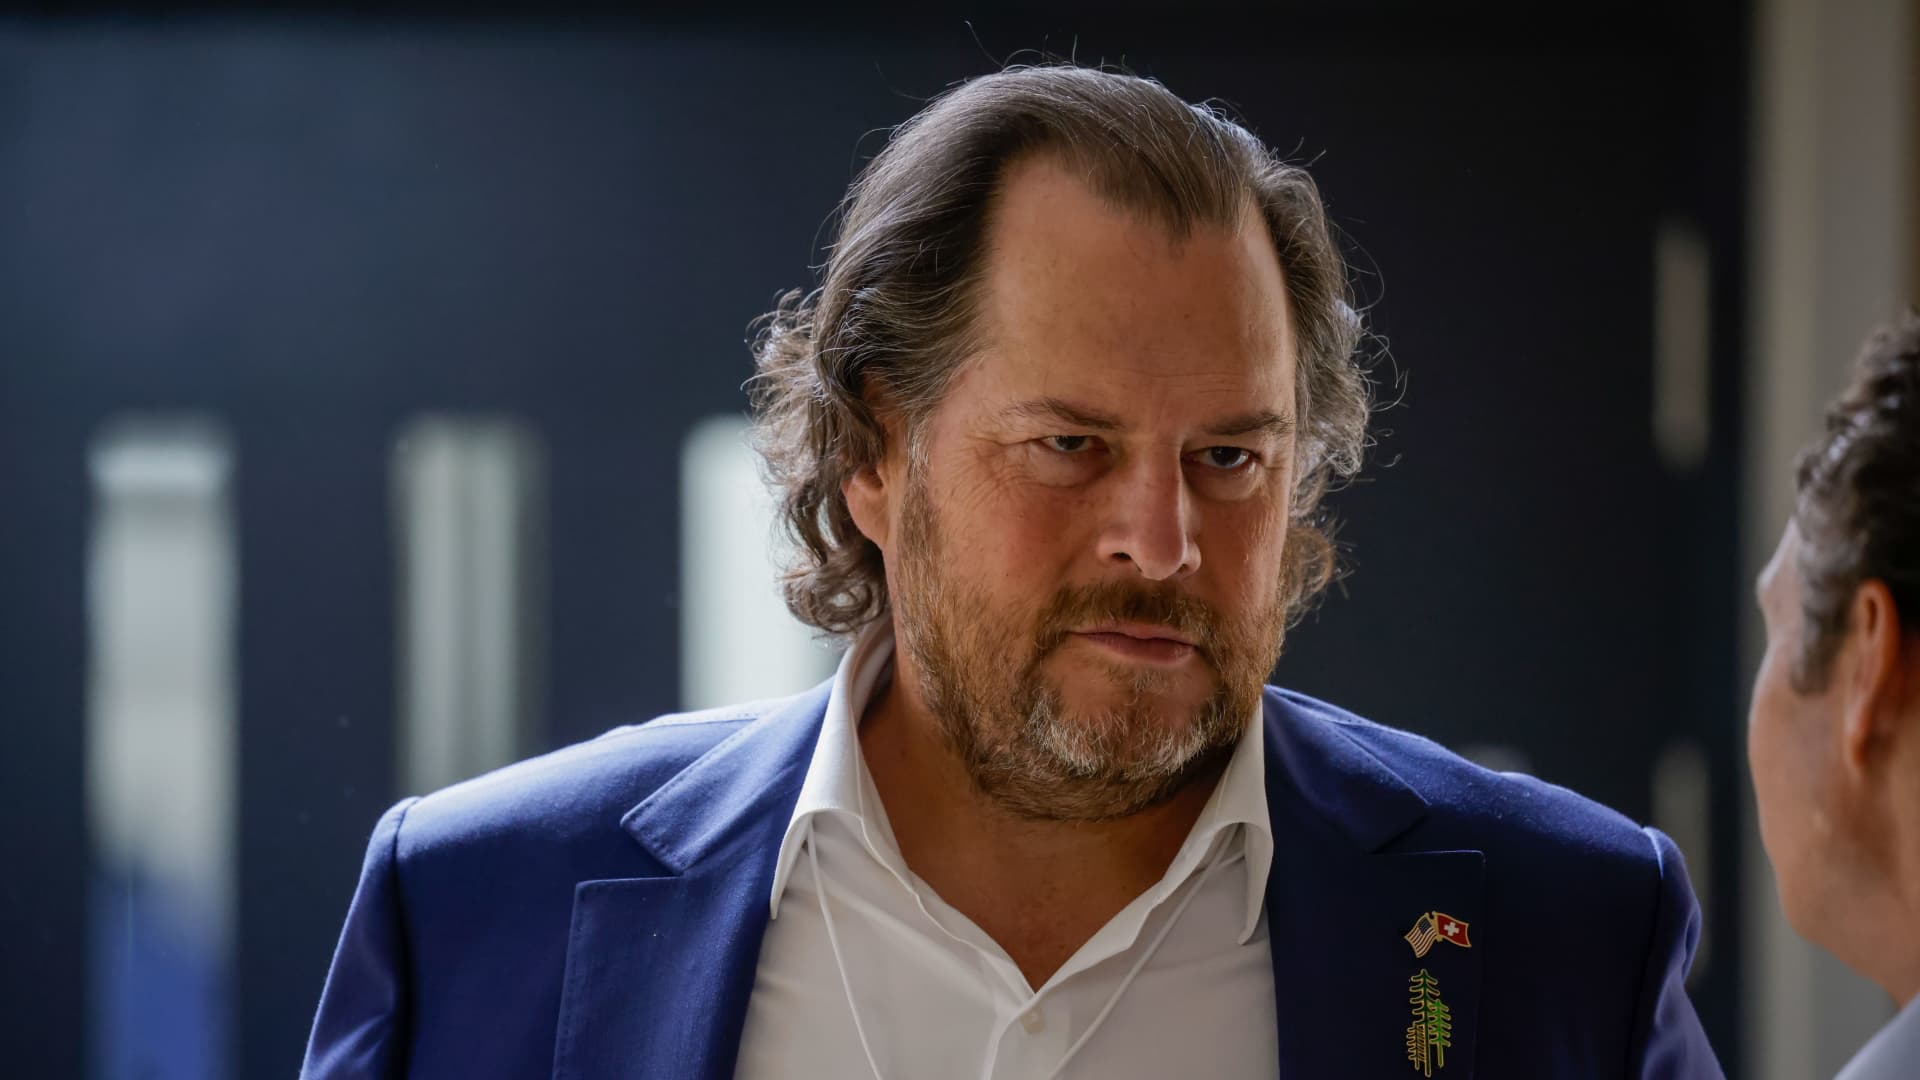 Salesforce co-CEO Marc Benioff hints at more potential layoffs after this week’s job cuts